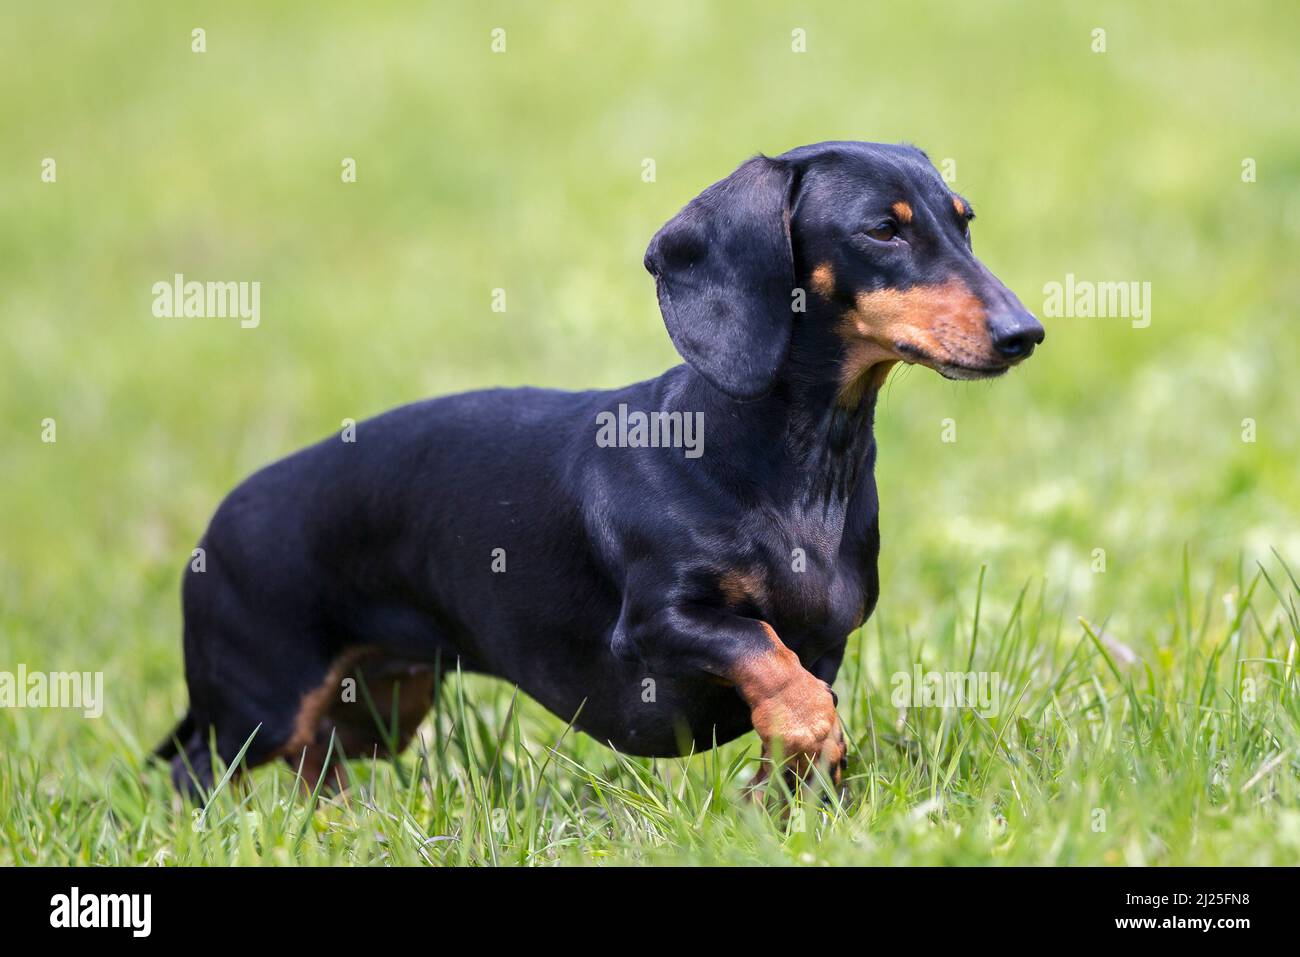 Black and tan smooth Dachshund. Adult dog walking on a meadow. Stock Photo